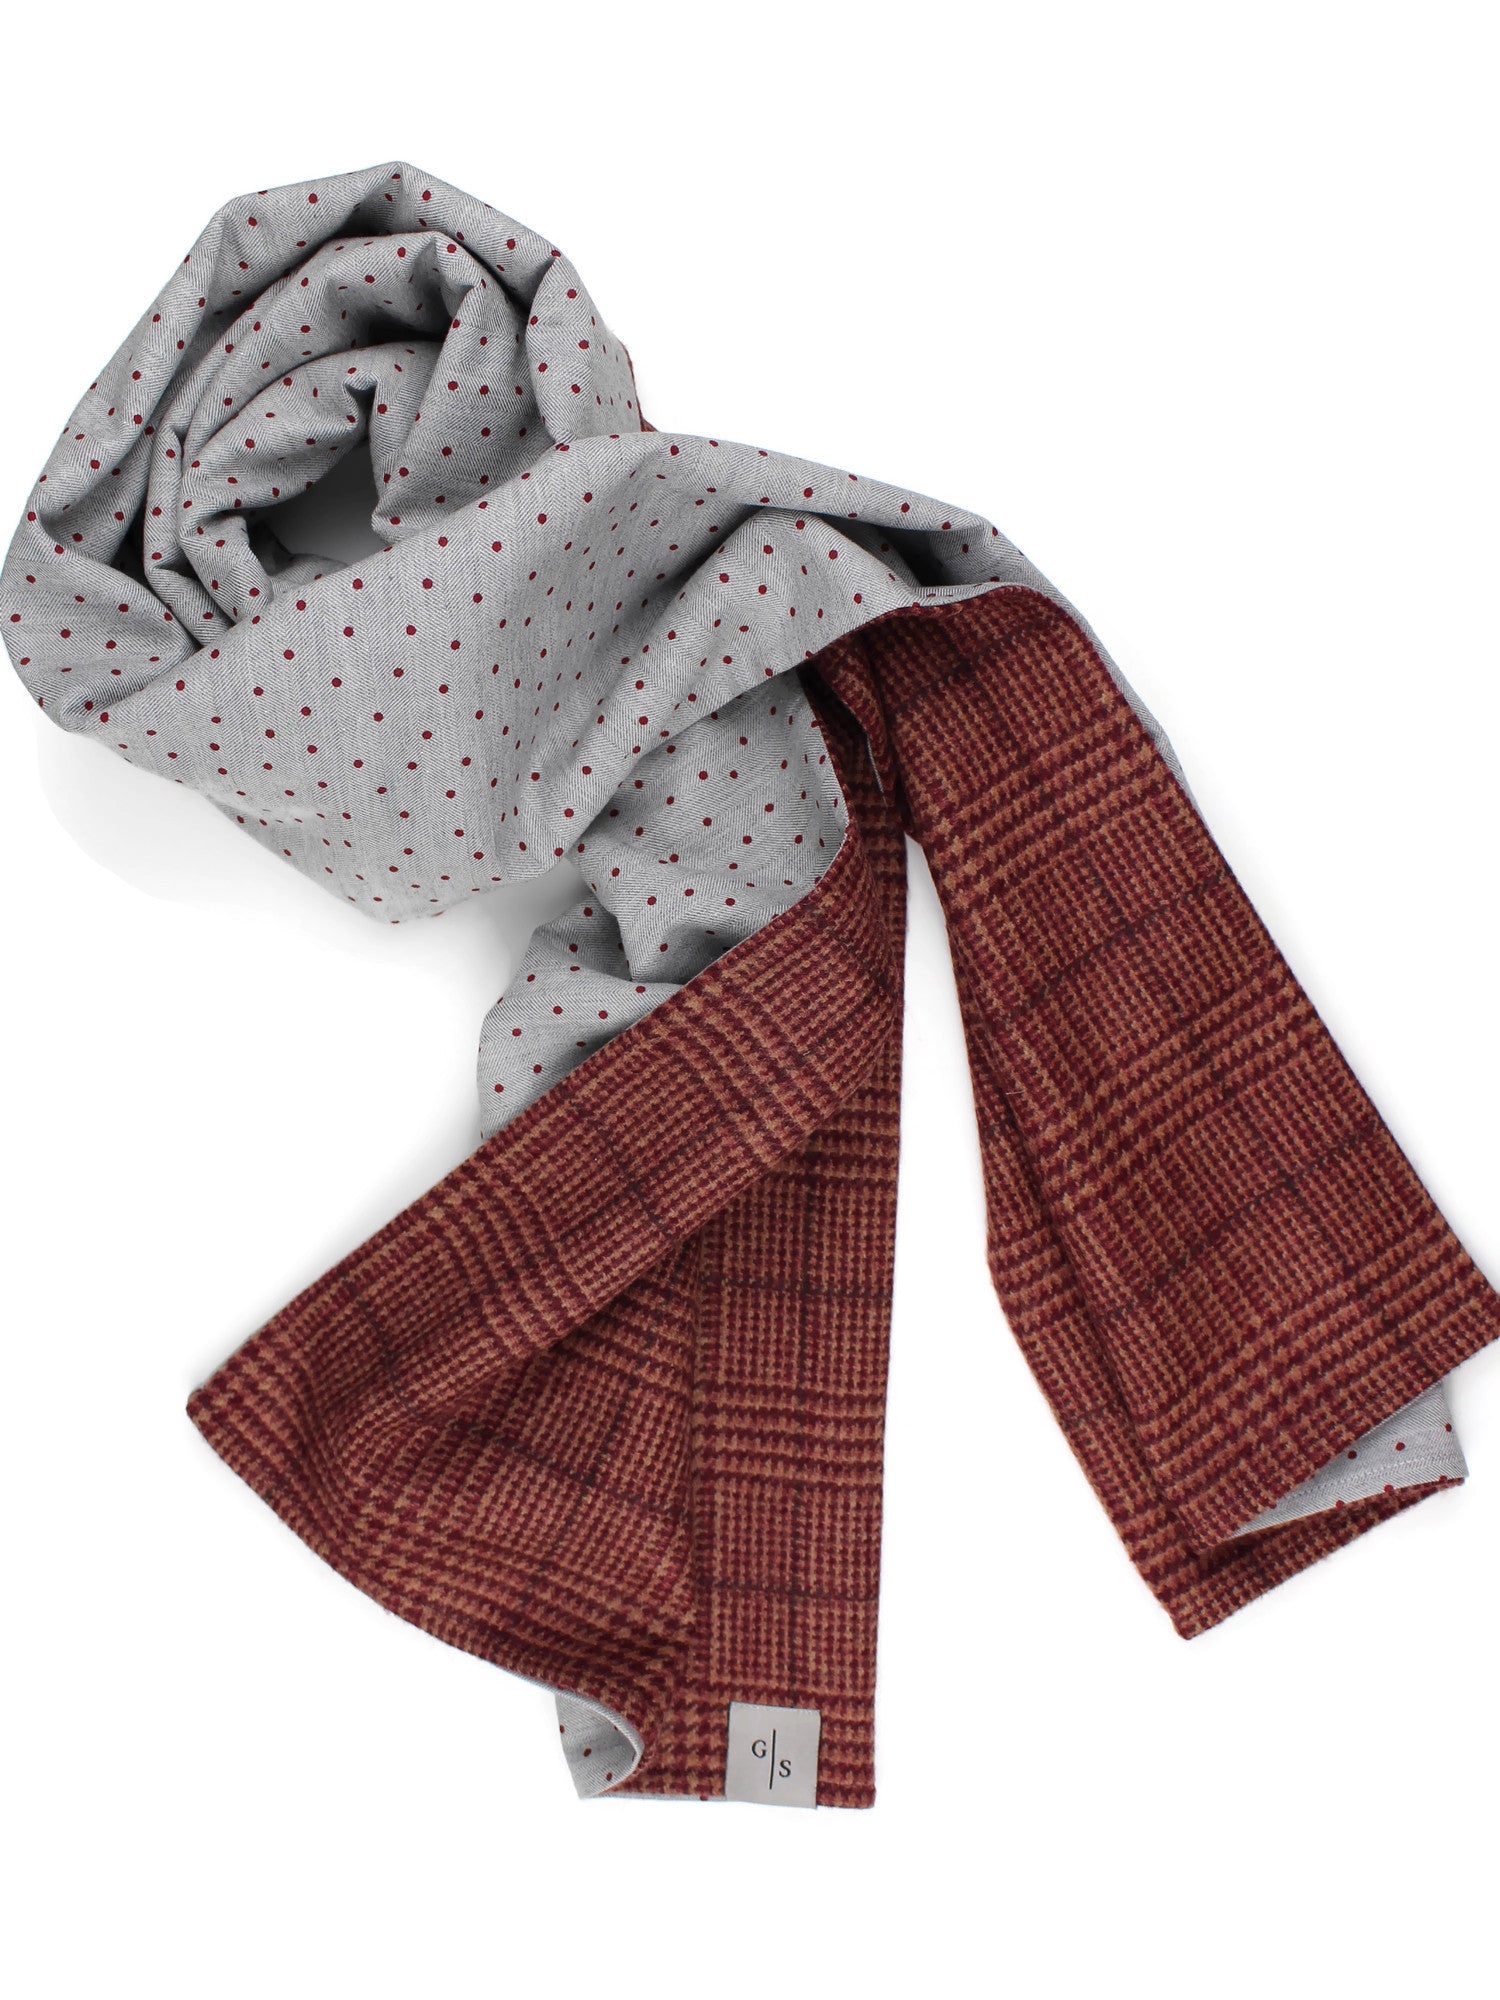 Wool Check with printed Cotton Men´s Scarf